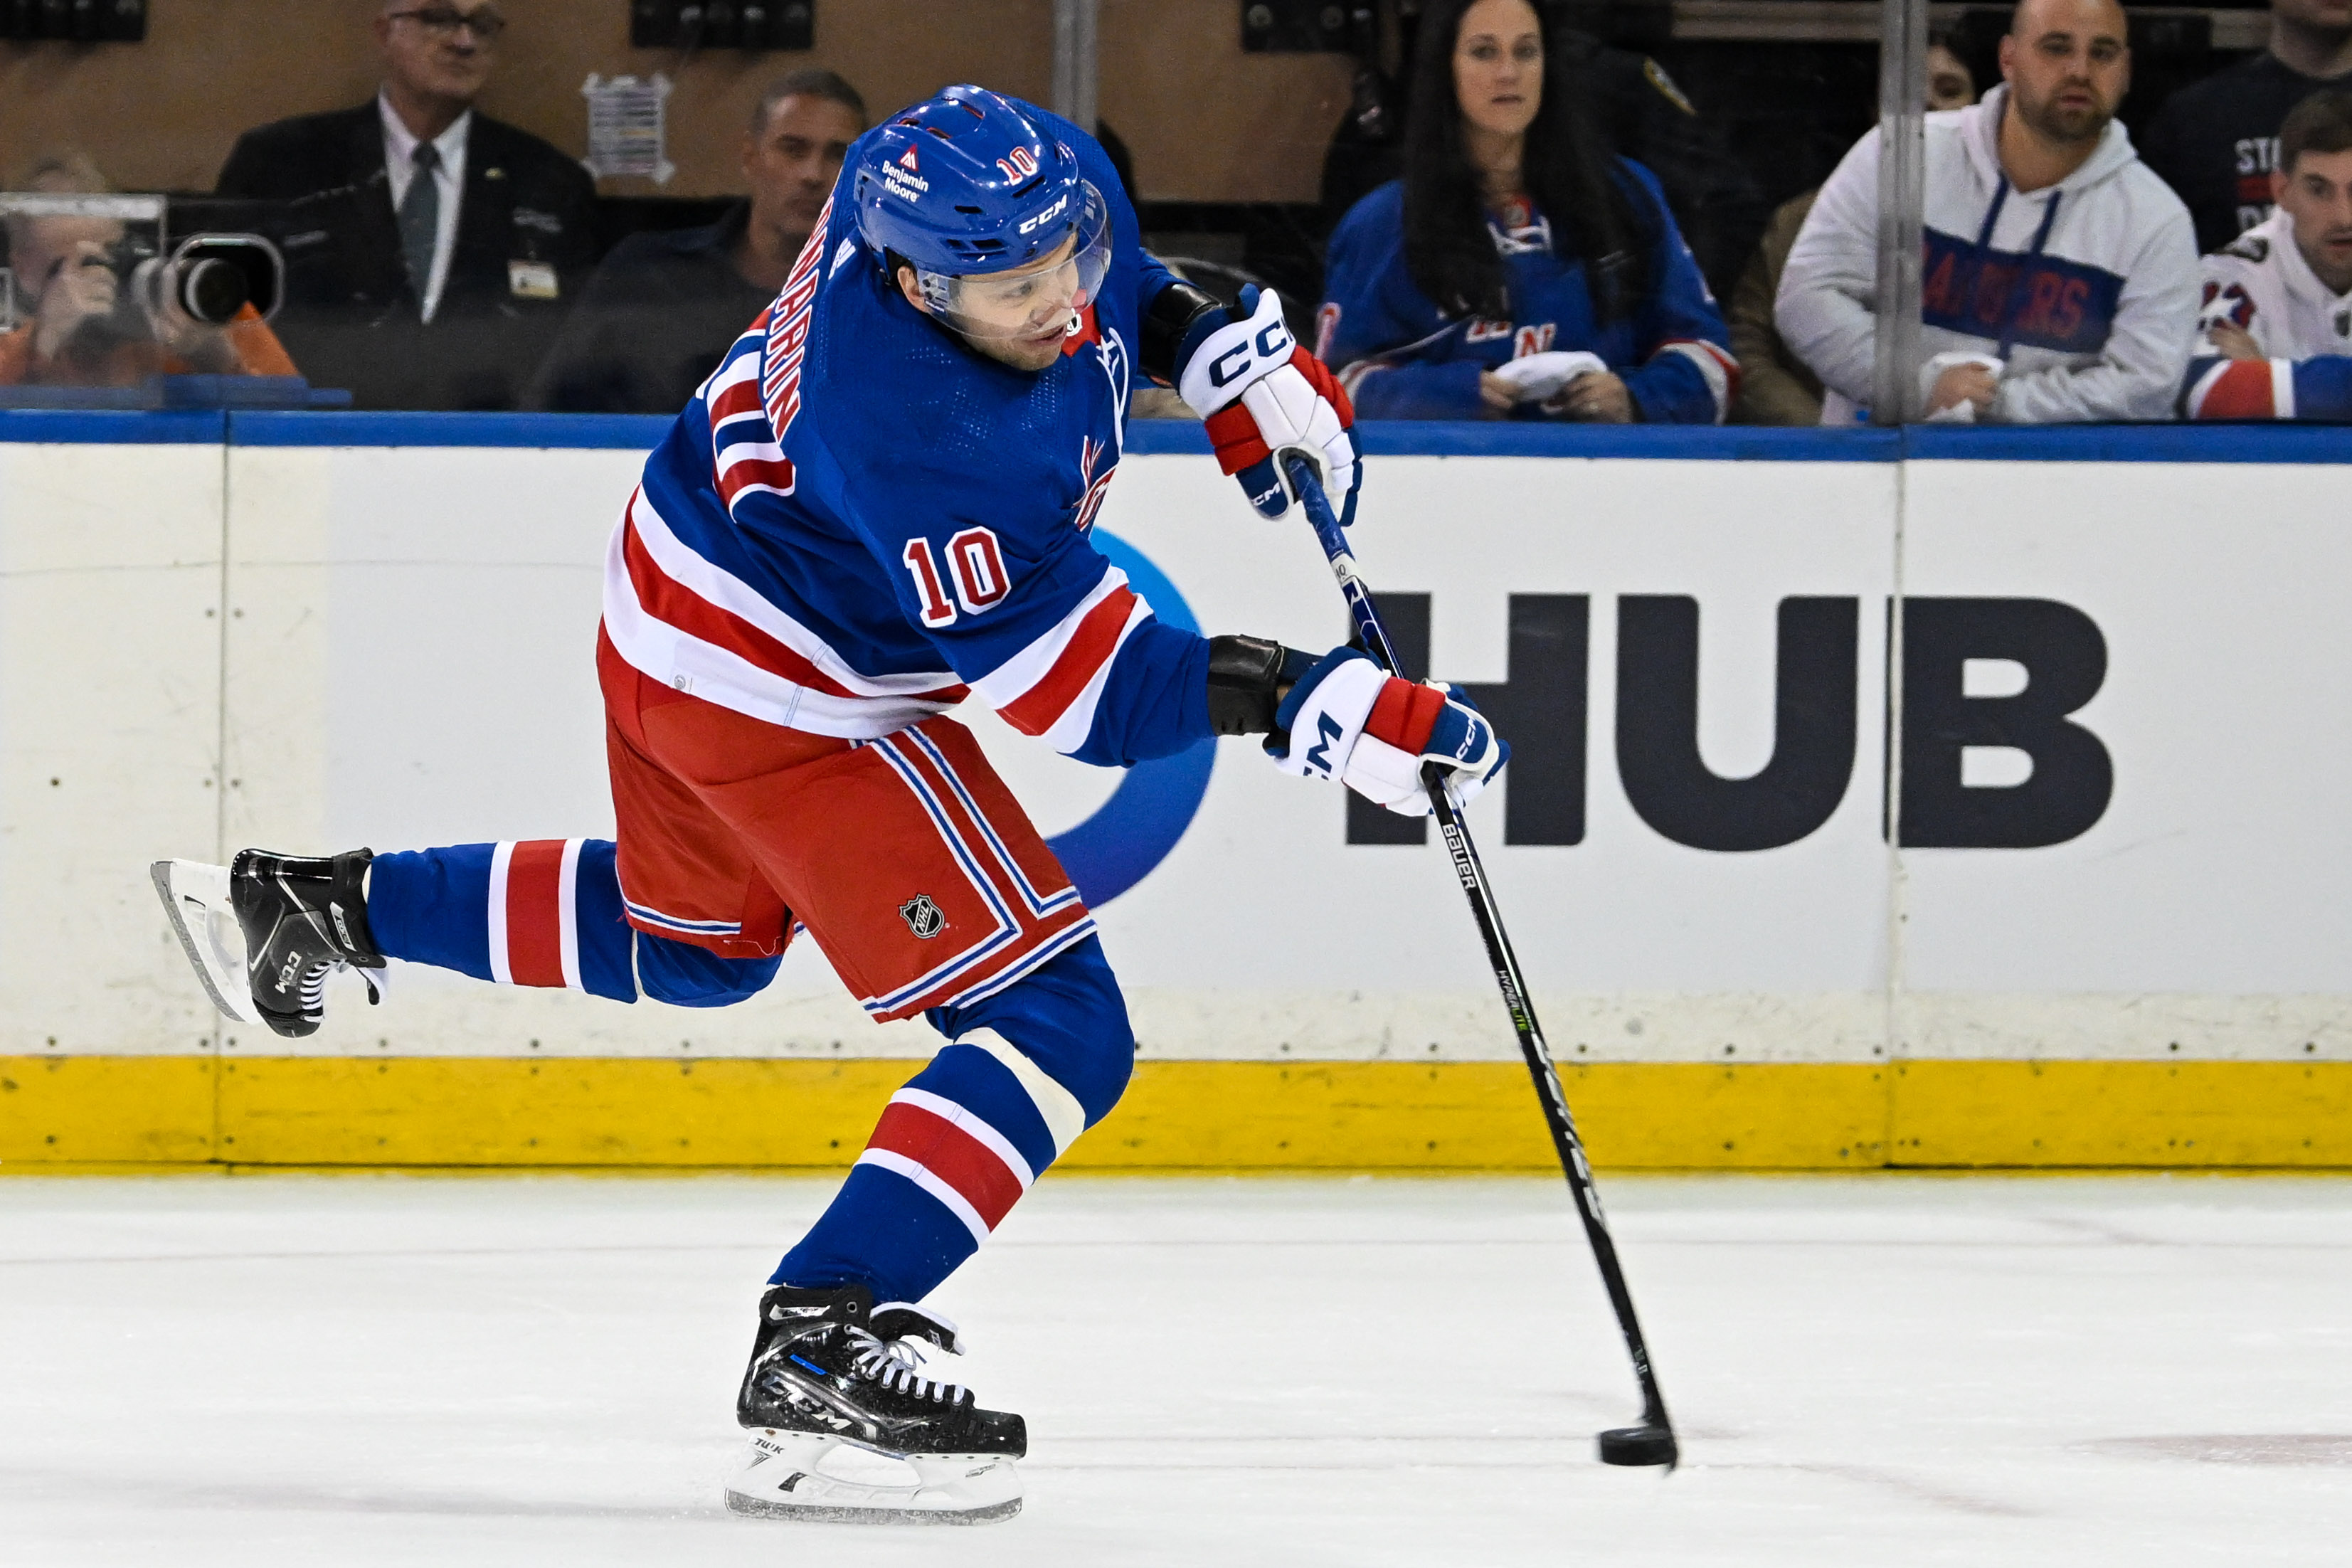 How the Rangers have earned their 20 series lead heading into the